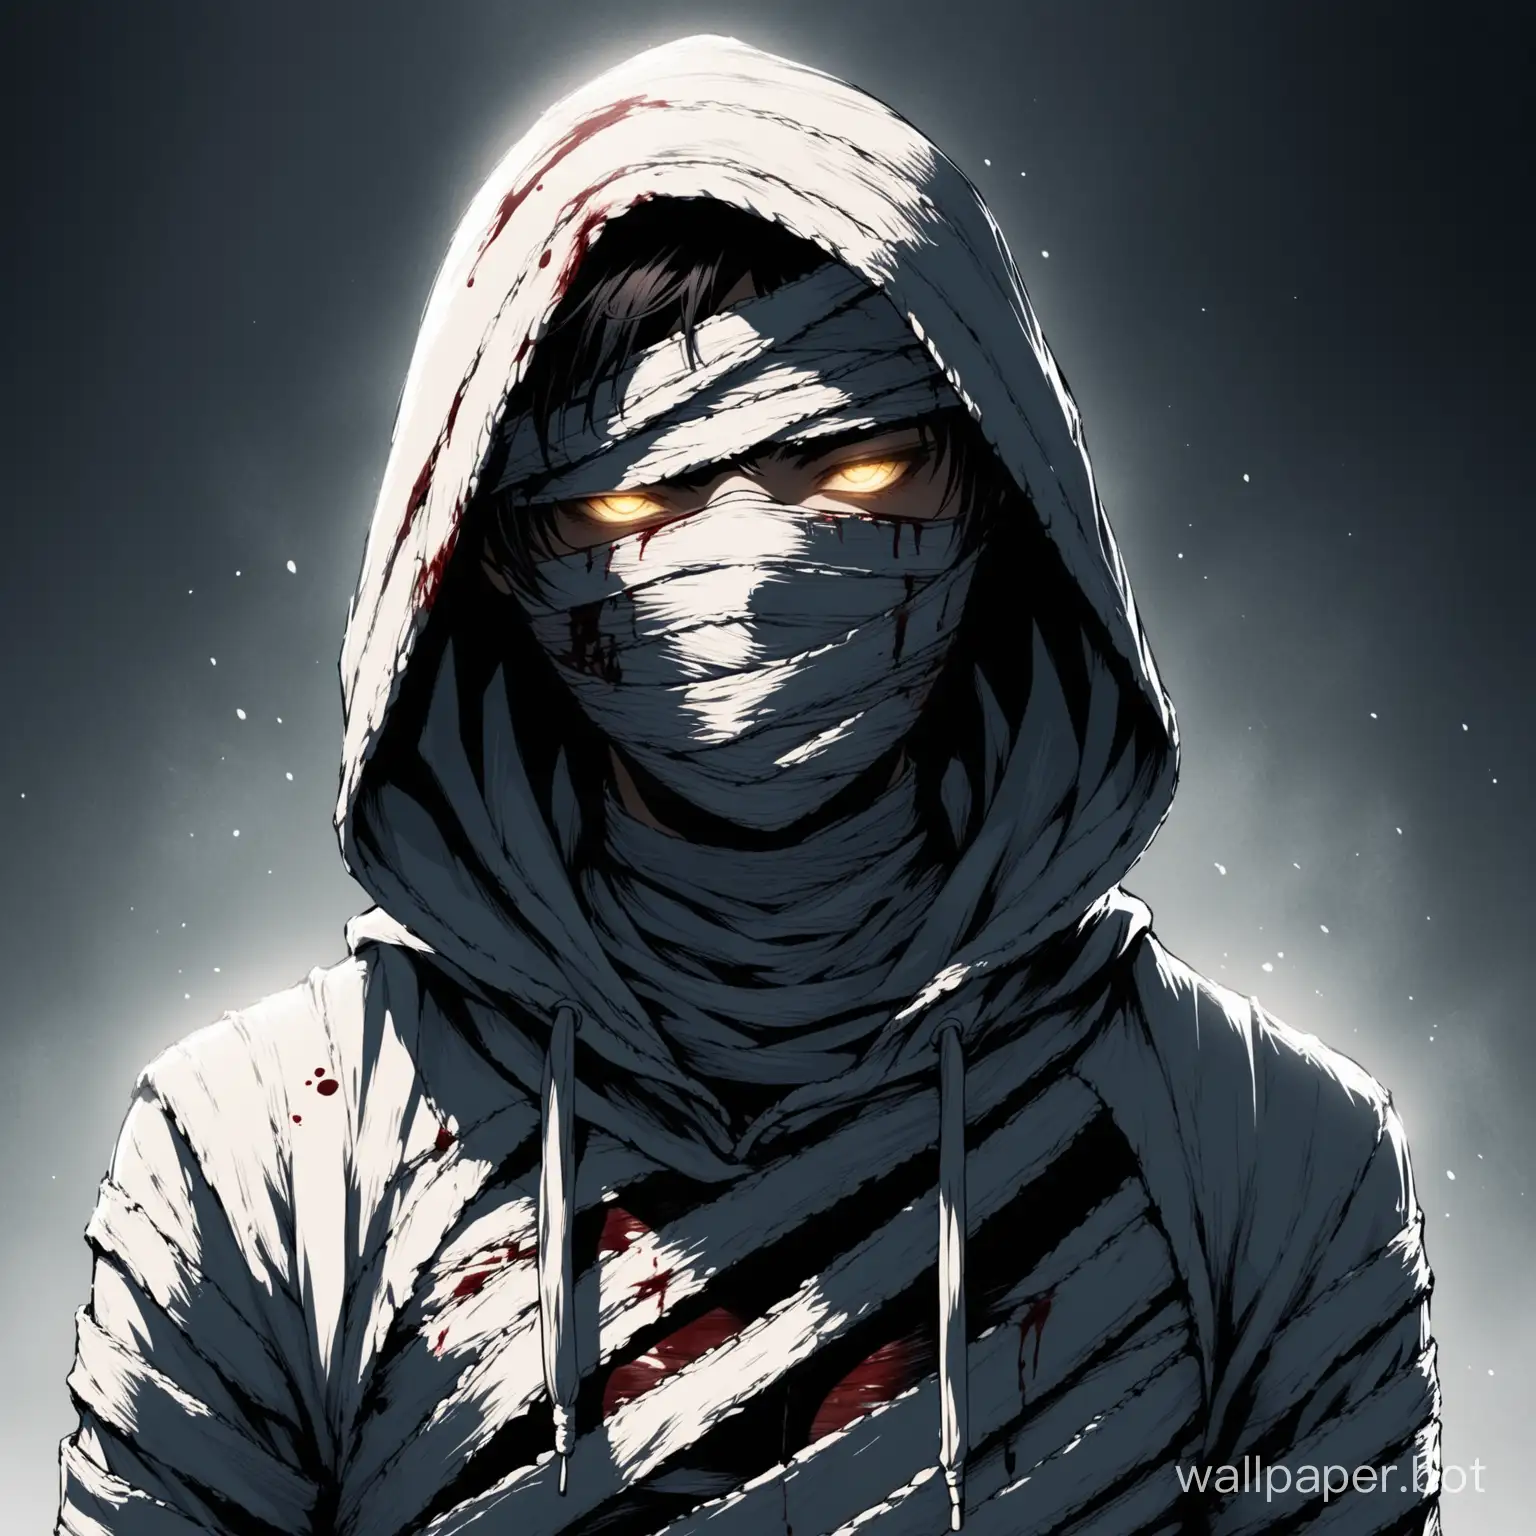 Mysterious-Hooded-Teen-with-Mask-and-Bloodstained-Bandages